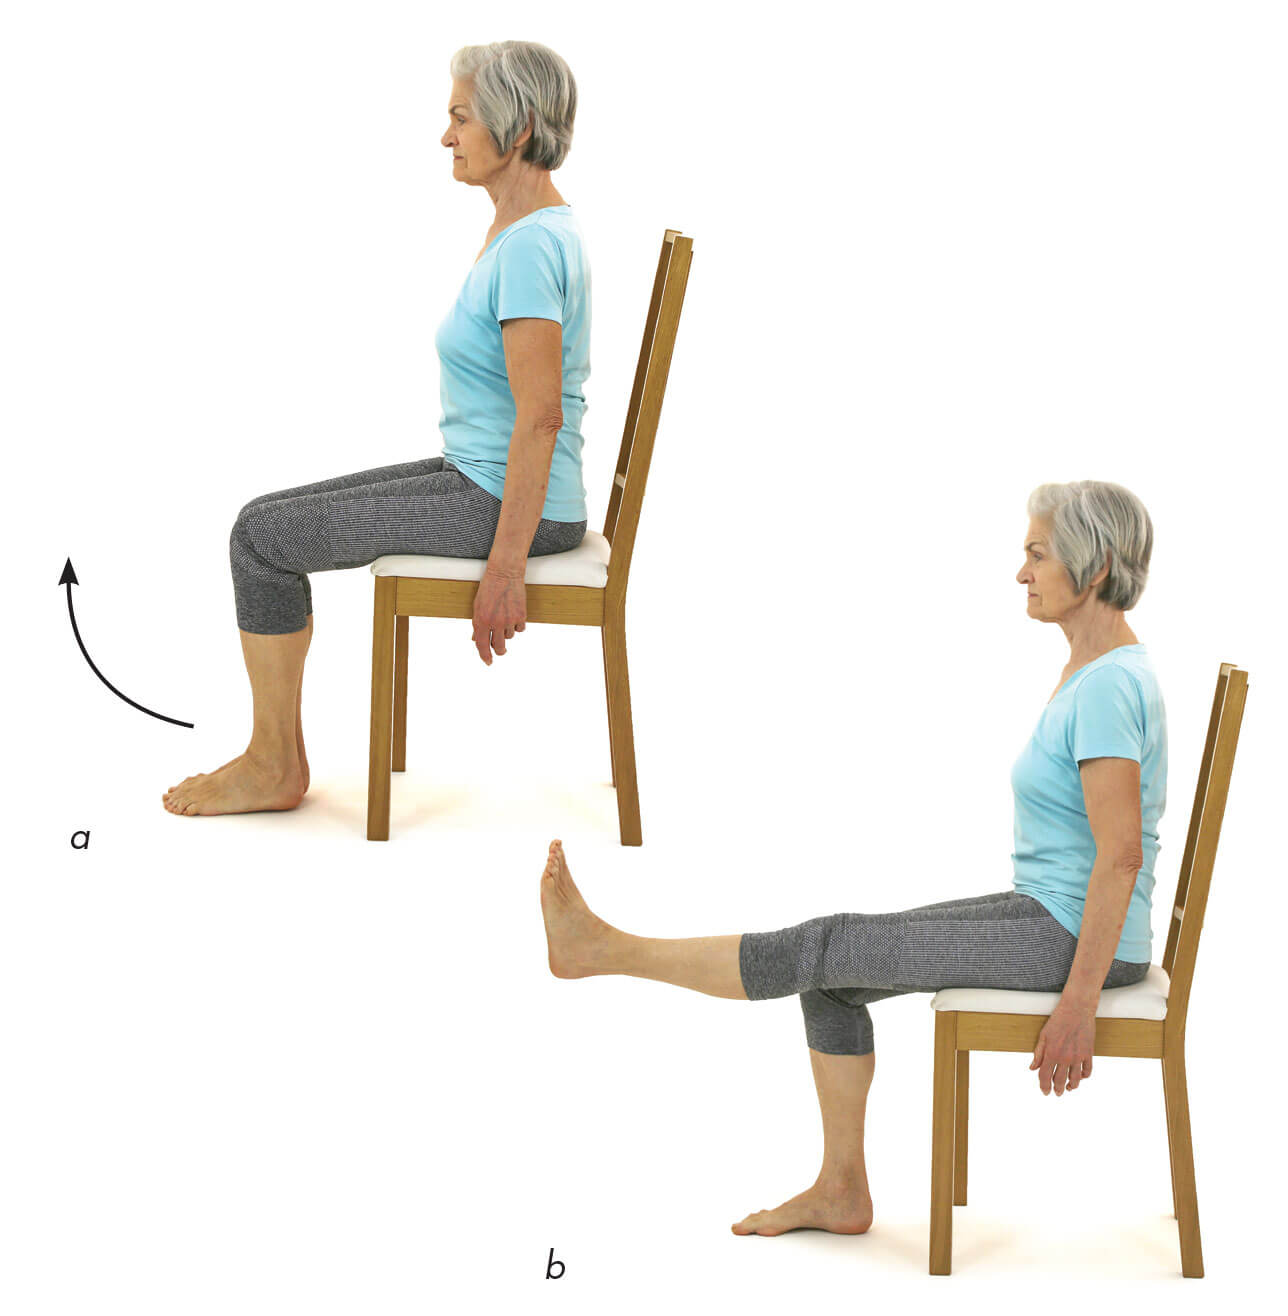 Figure 8.5 Testing knee extension in the sitting position. Courtesy of Tim Allardyce, Rehabmypatient.com.